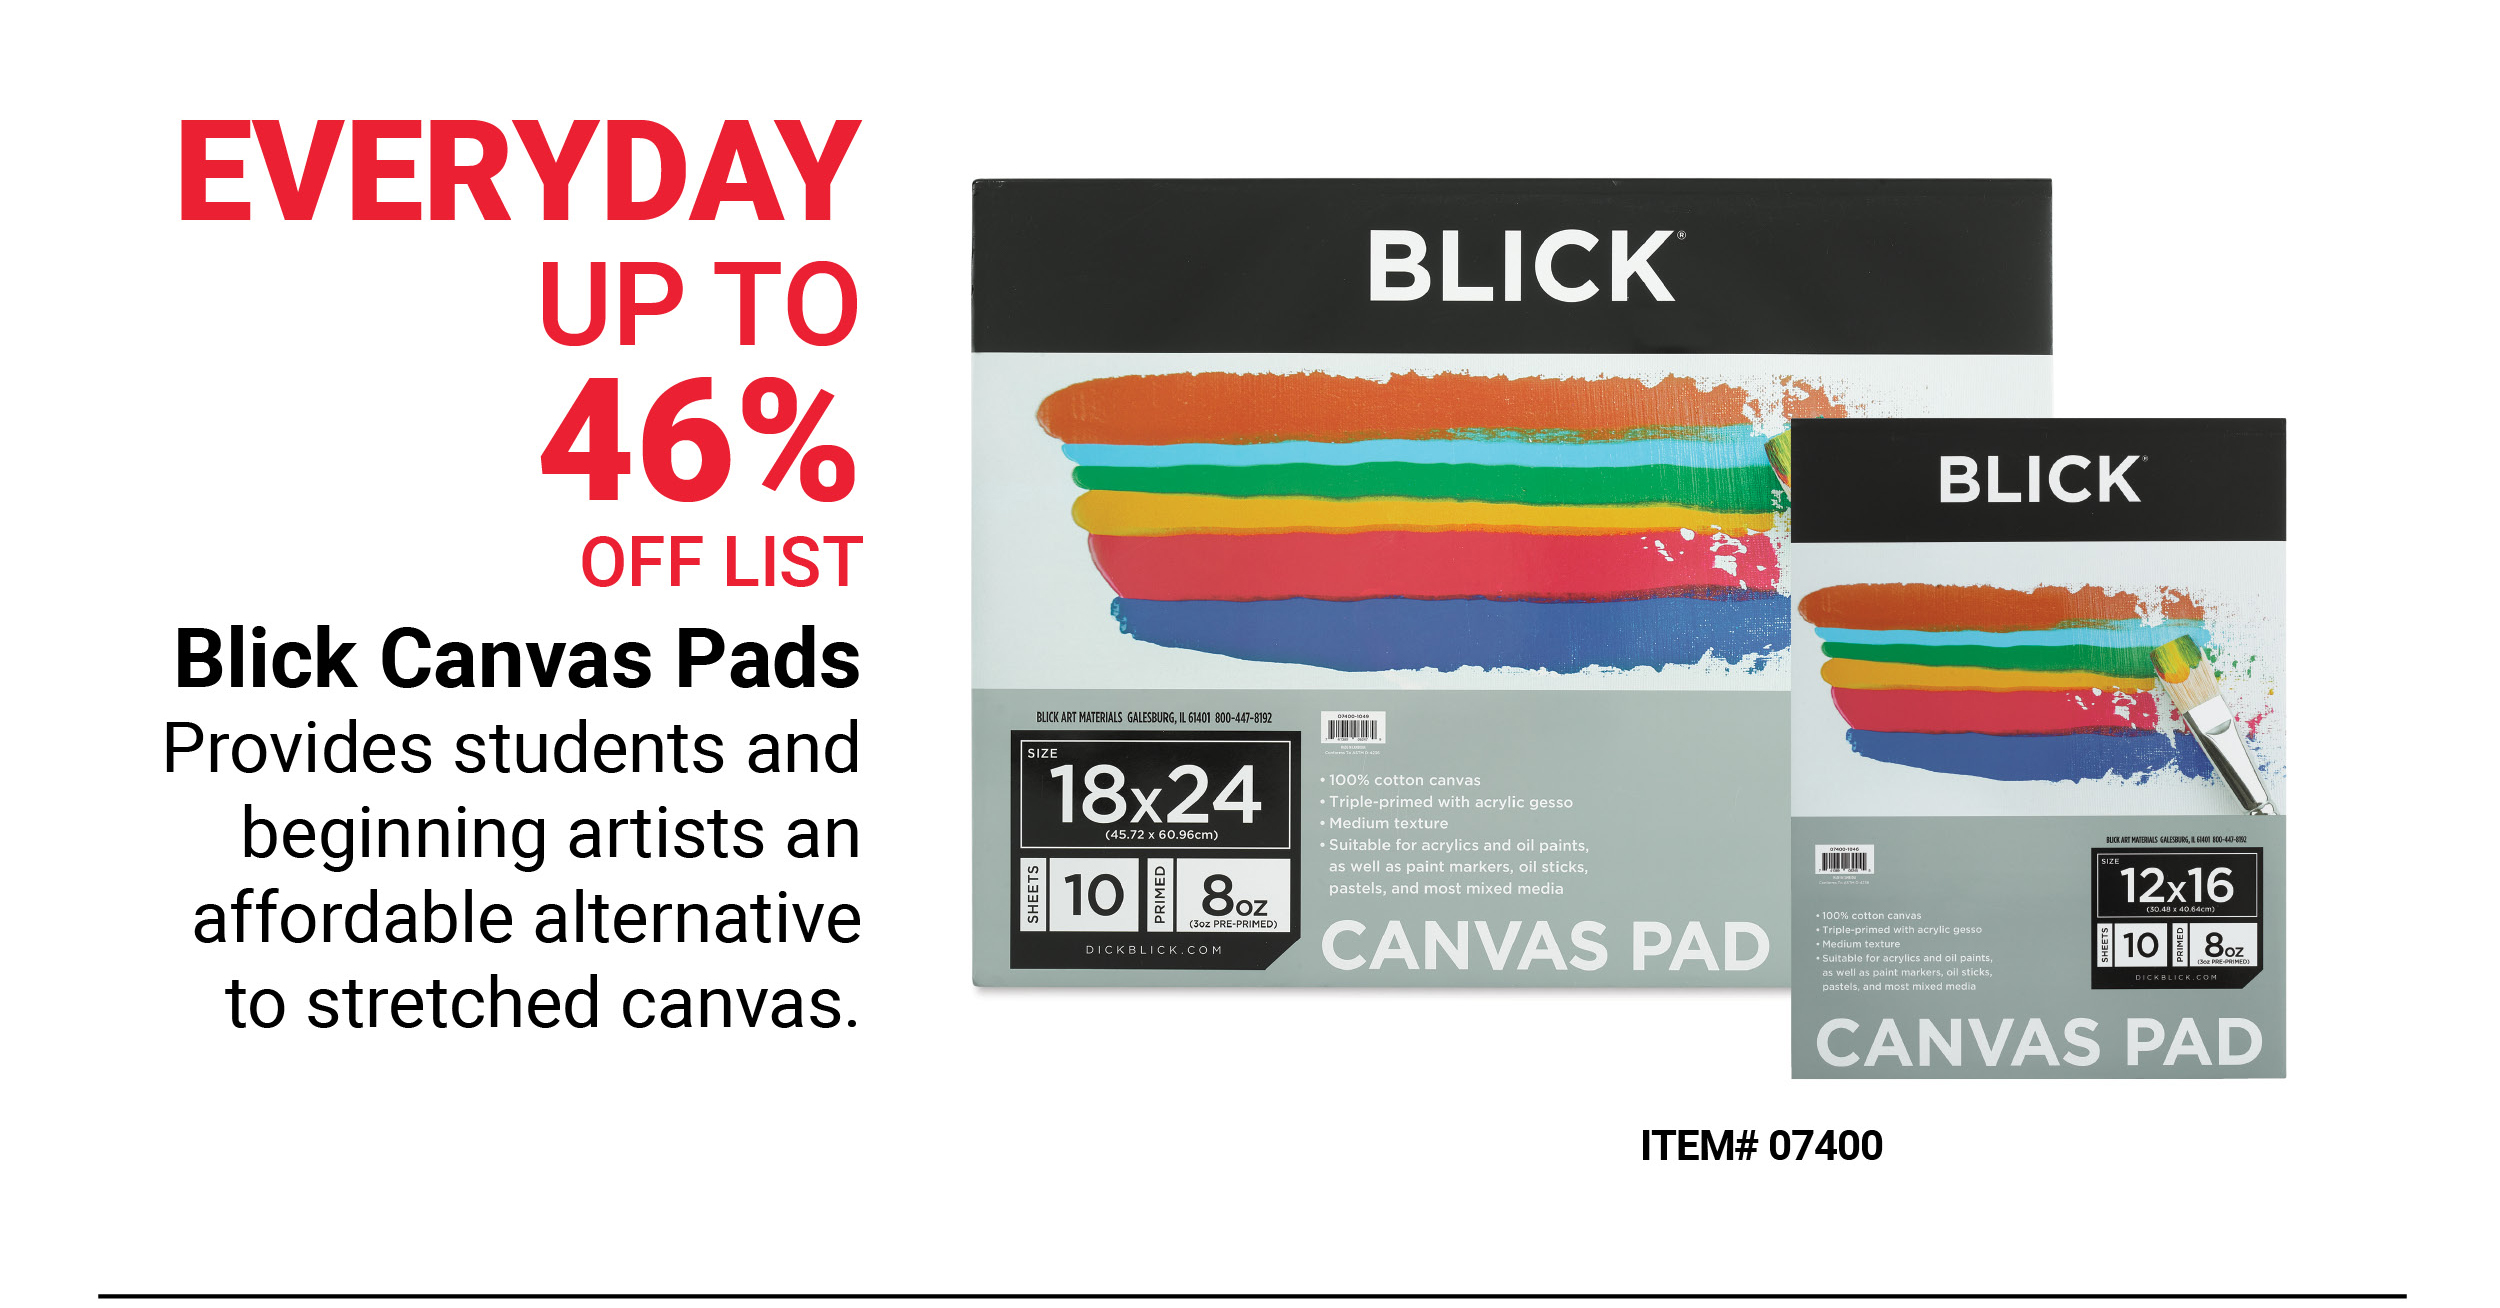 Blick Canvas Pads Everyday Up to 46% Off List